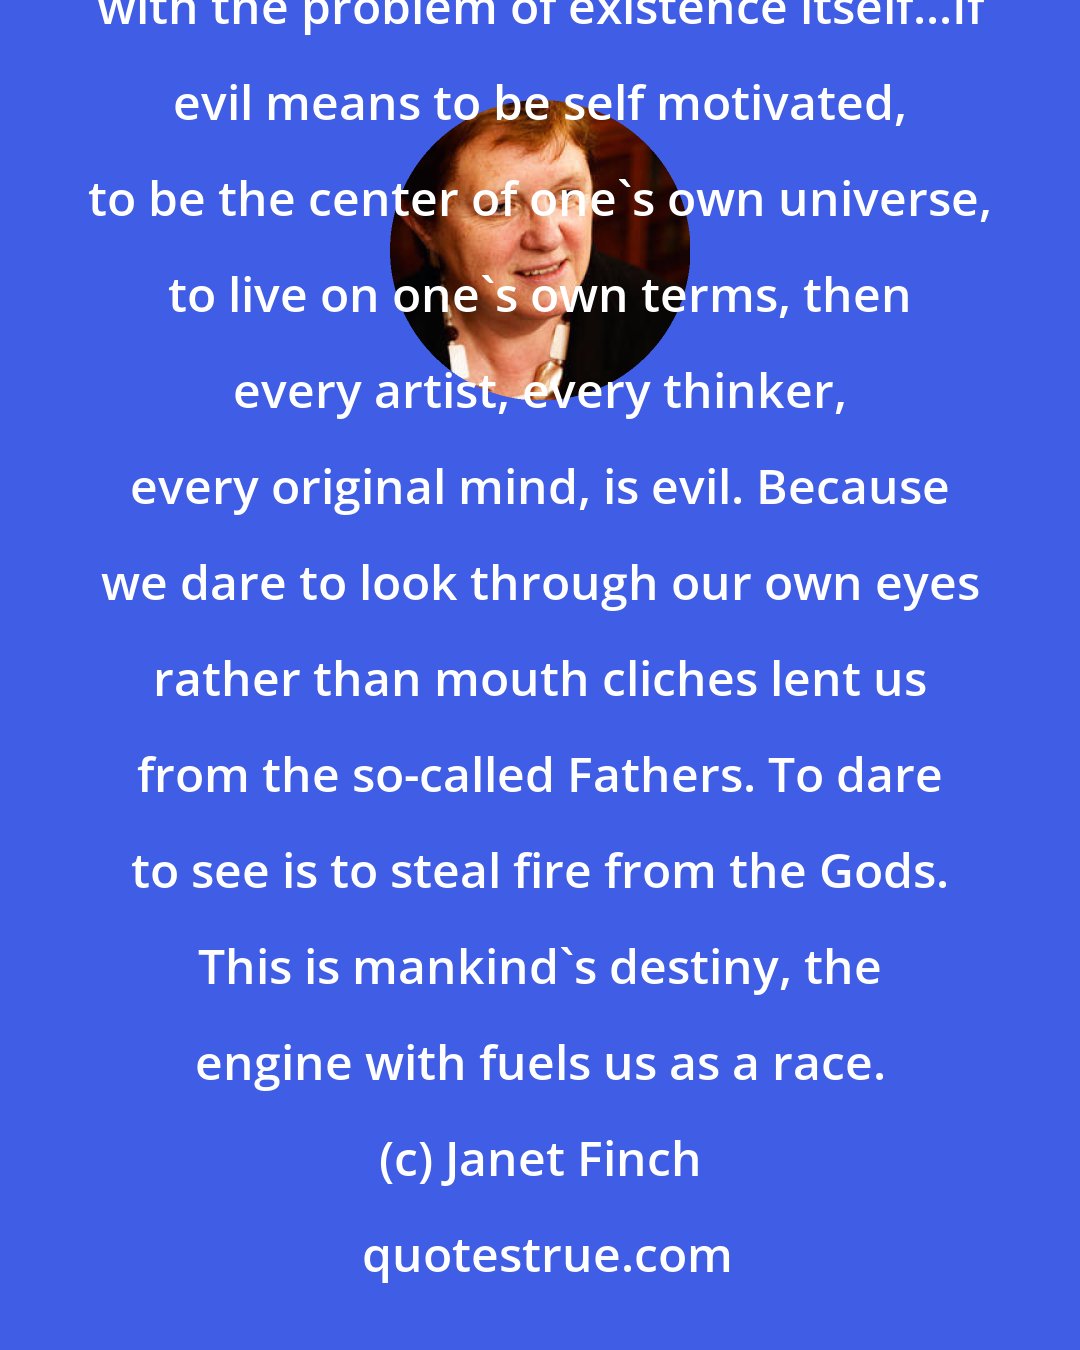 Janet Finch: The question of good and evil will always be one of philosophy's most intriguing problems, up there with the problem of existence itself...If evil means to be self motivated, to be the center of one's own universe, to live on one's own terms, then every artist, every thinker, every original mind, is evil. Because we dare to look through our own eyes rather than mouth cliches lent us from the so-called Fathers. To dare to see is to steal fire from the Gods. This is mankind's destiny, the engine with fuels us as a race.